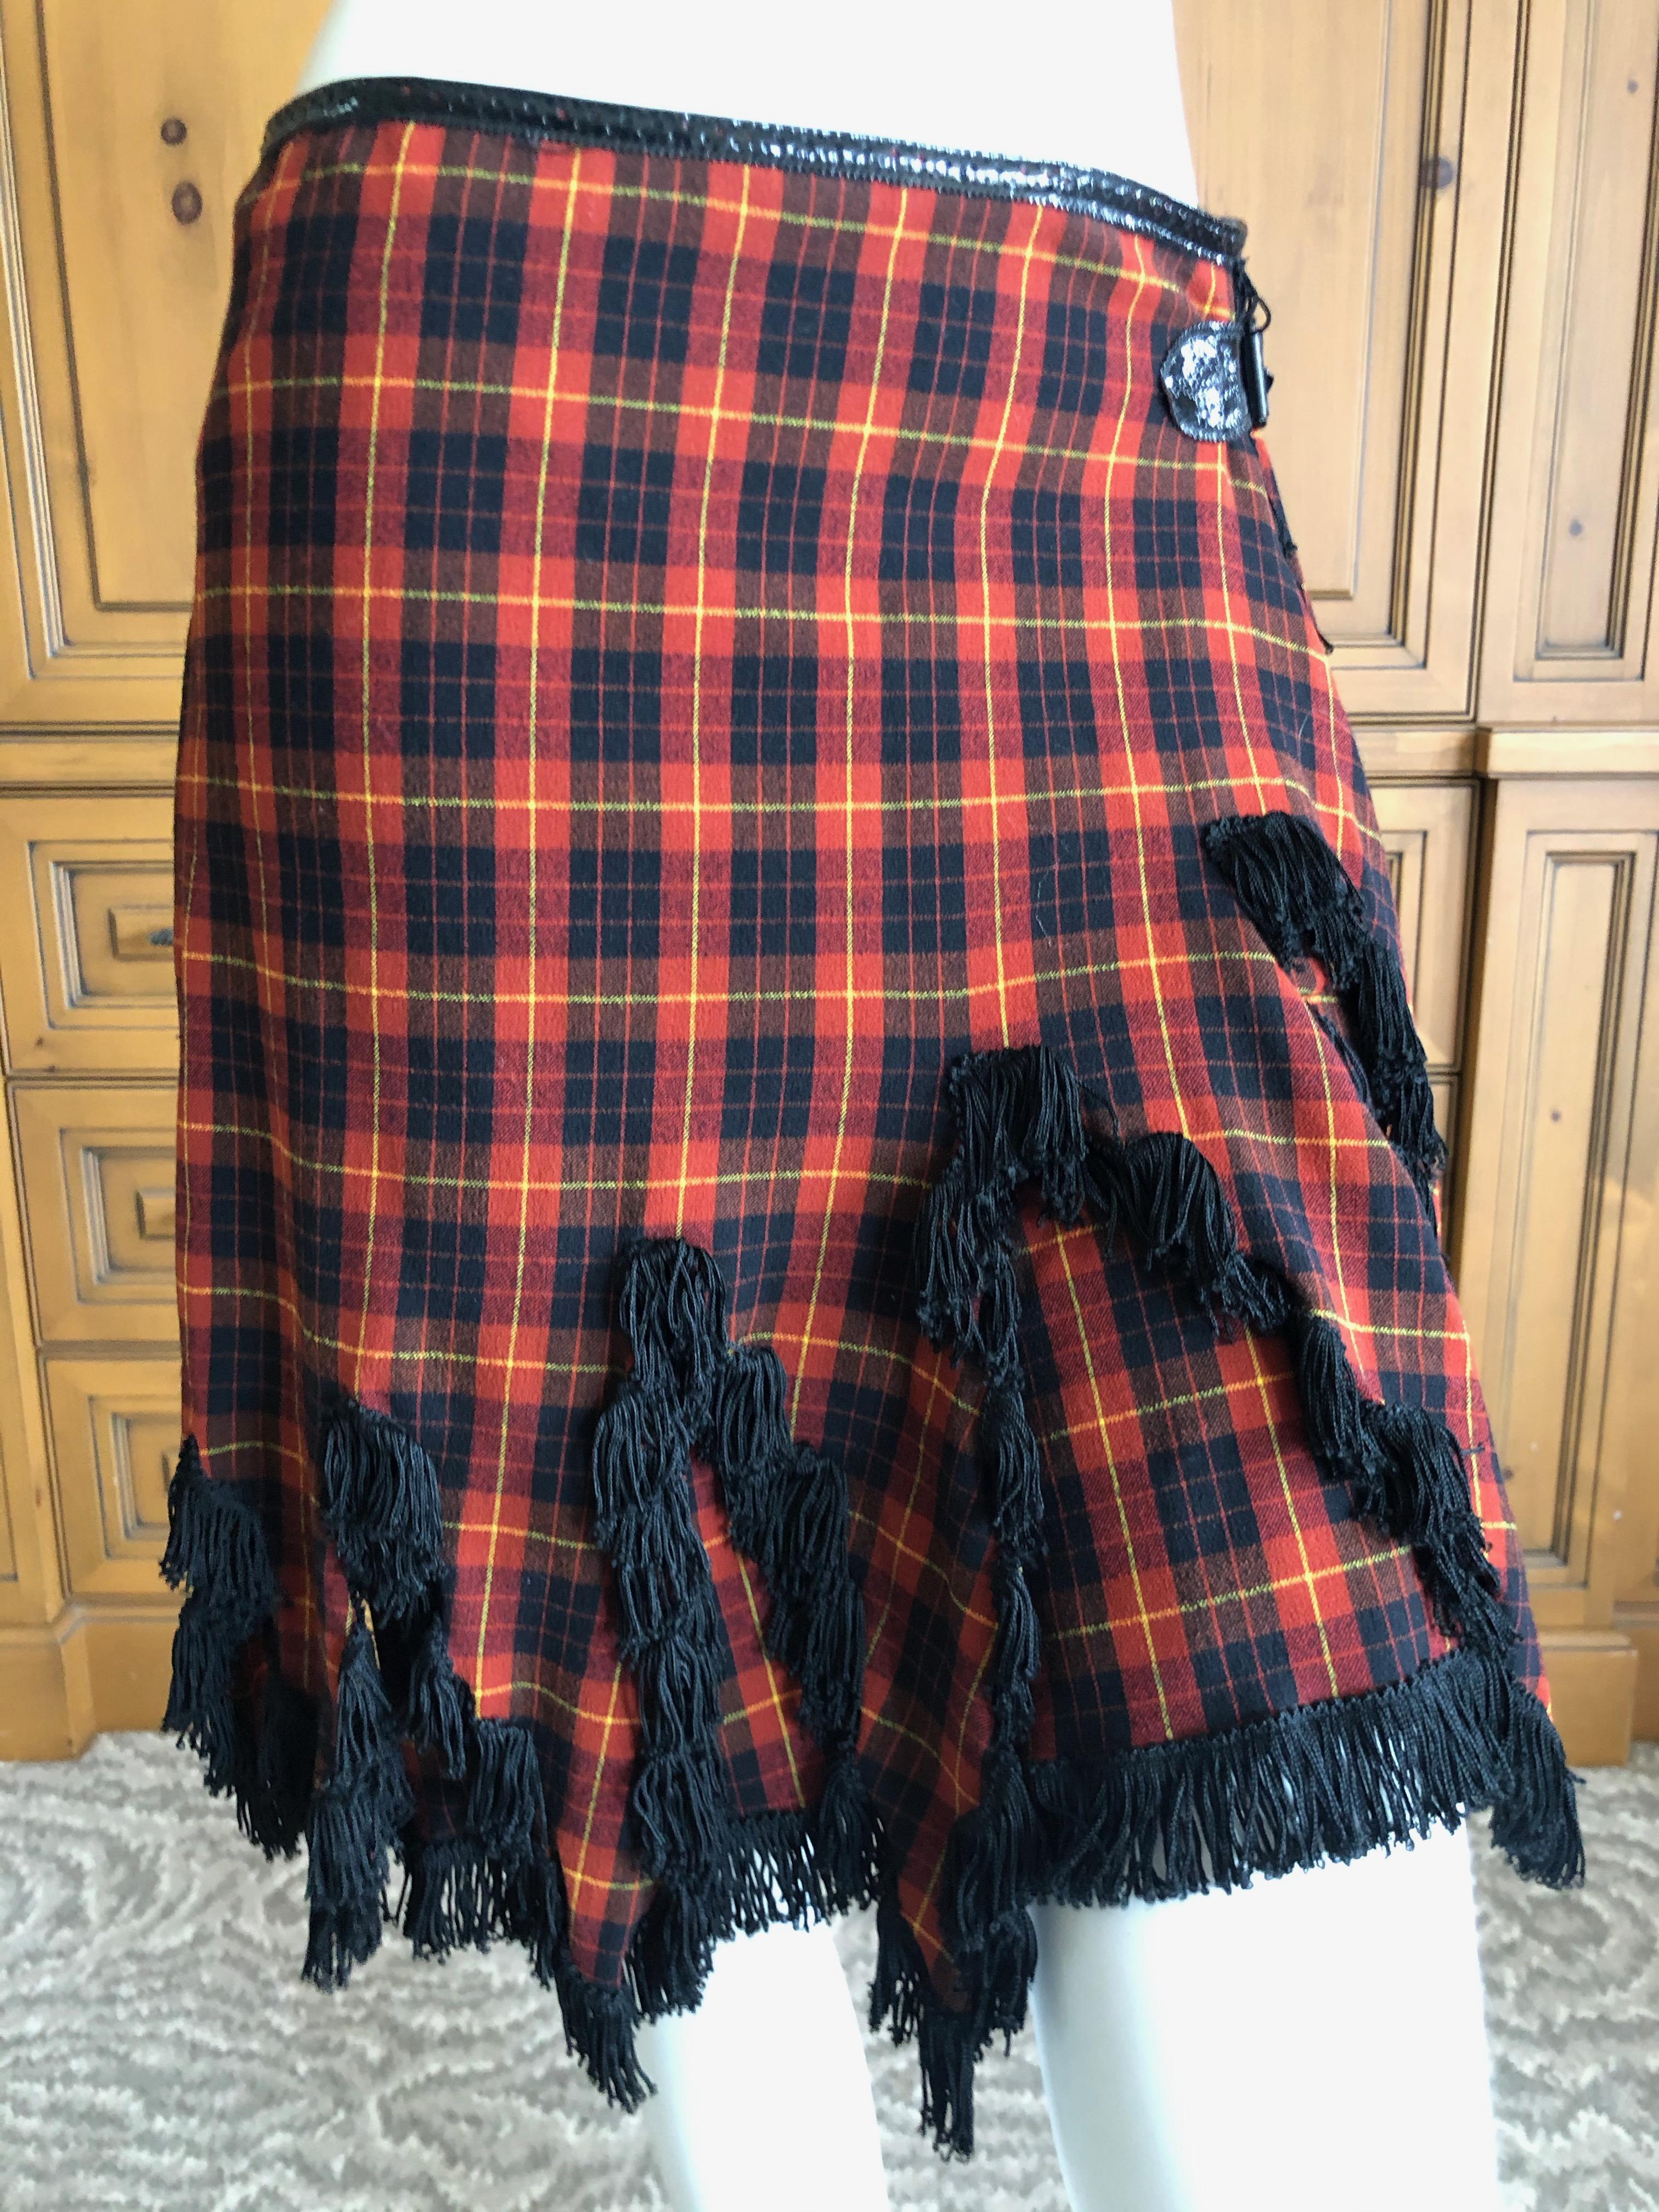 Jean Paul Gaultier Femme Fringed Tartan Wrap Skirt with Patent Leather Trim.
This is a wrap style skirt, and is much better in person.
The skirt is cut like 